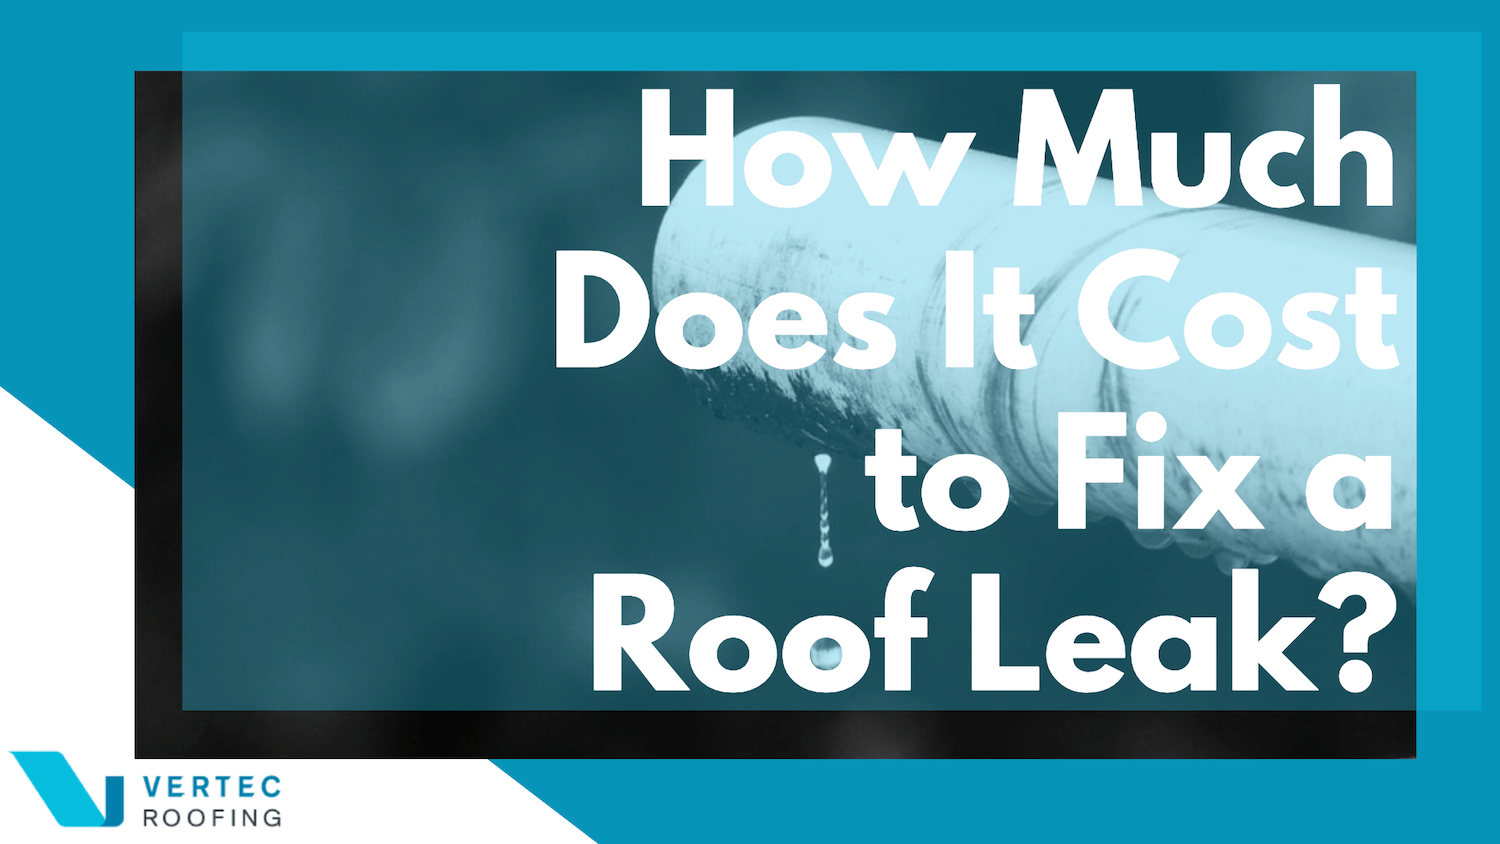 How Much Does it Cost to Fix a Roof Leak?